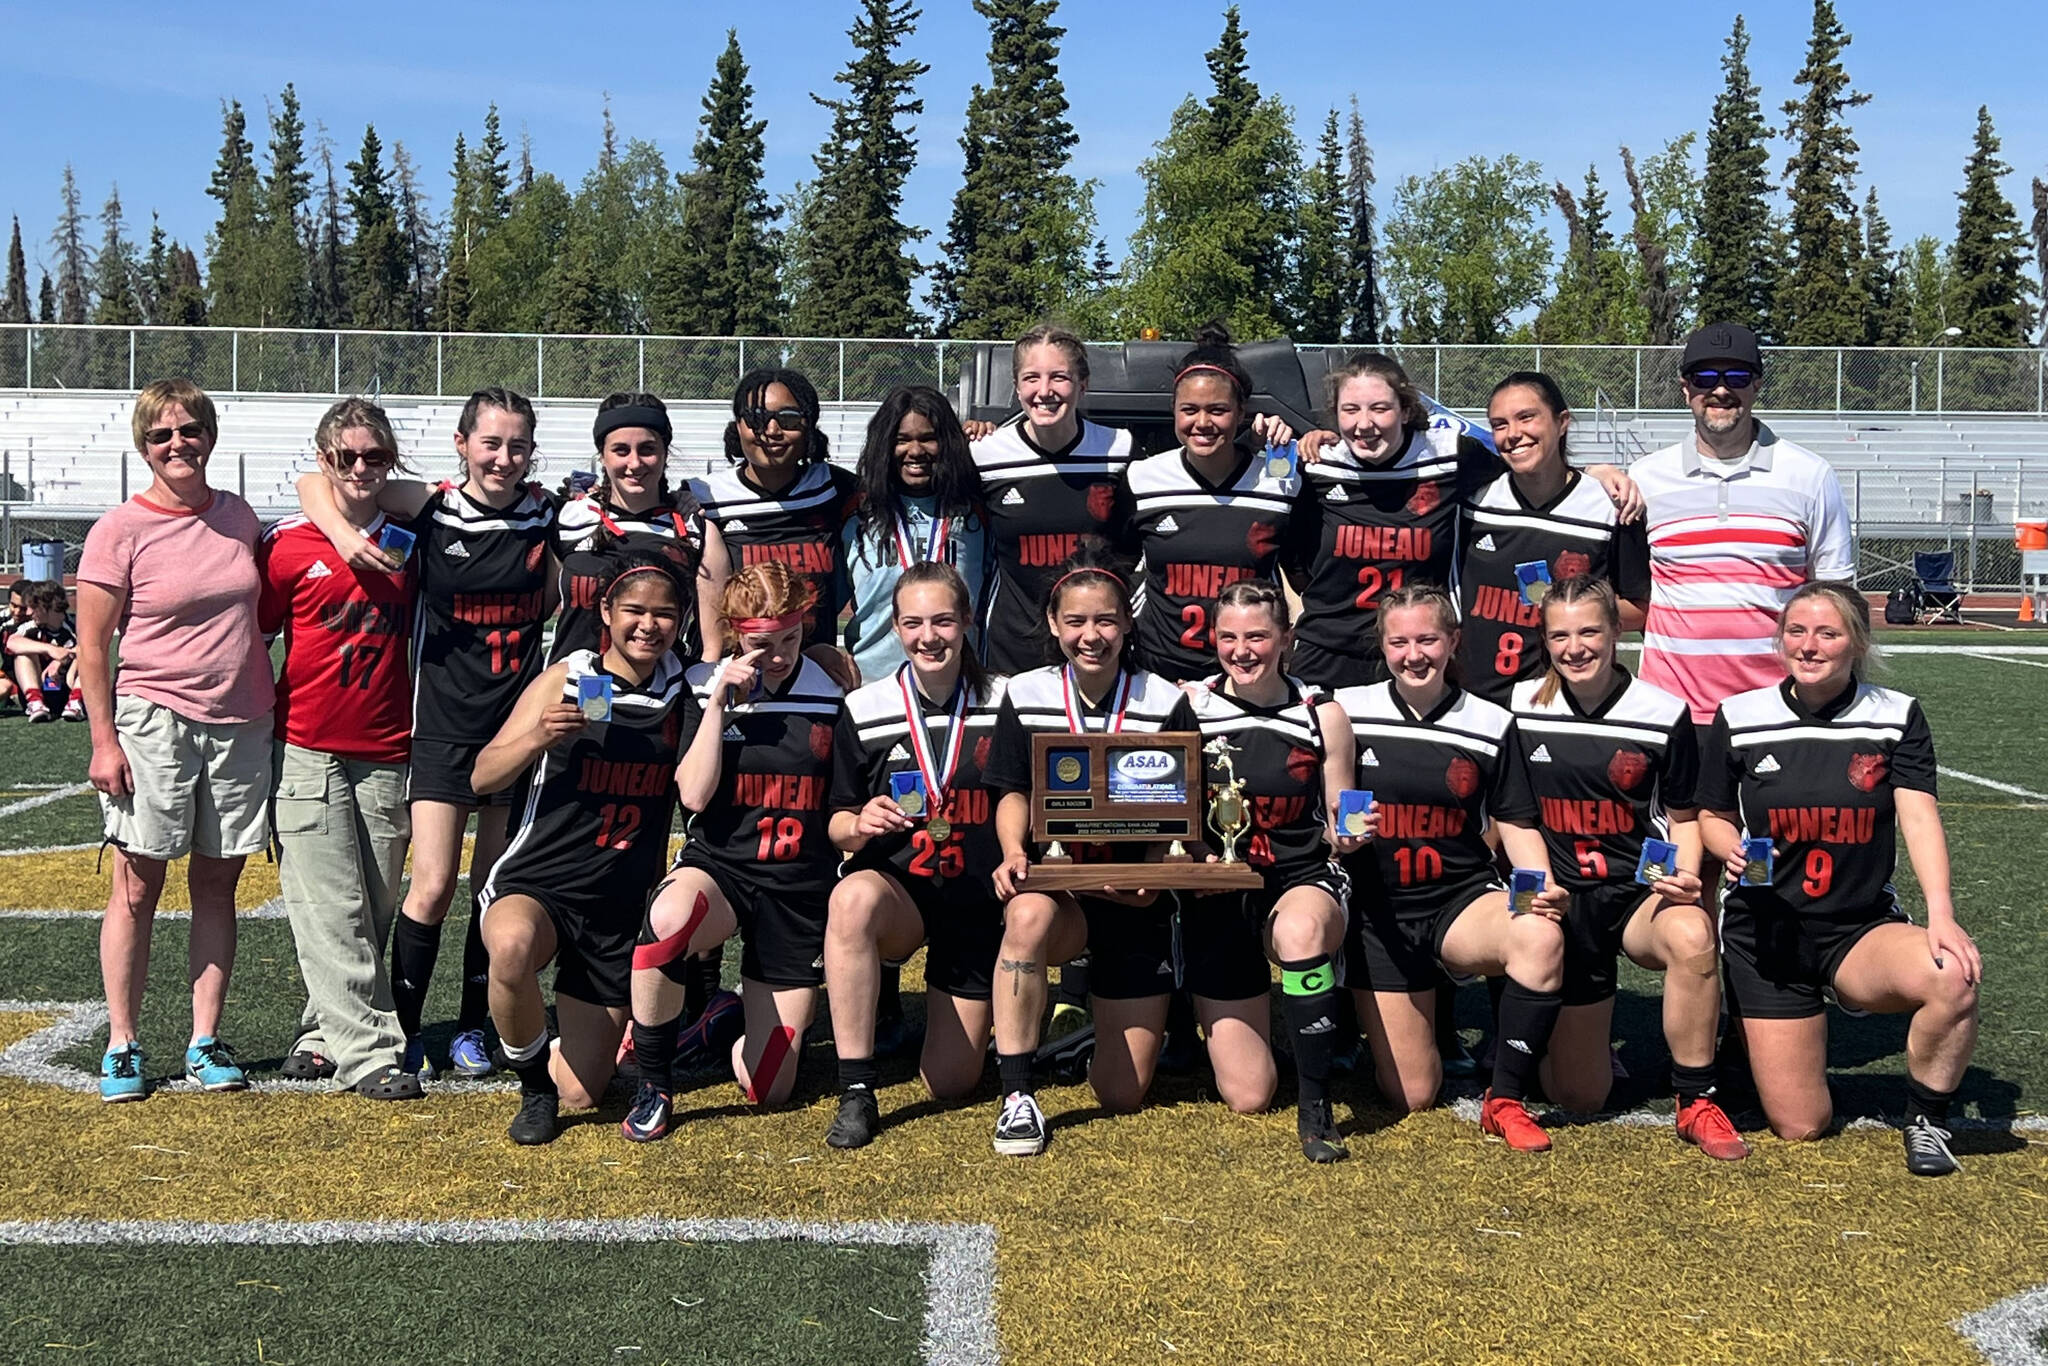 Courtesy photo / Myra Pugh 
The JDHS girls soccer team swept to victory in the DII state championship on Saturday without a single goal being scored against them in the tournament.